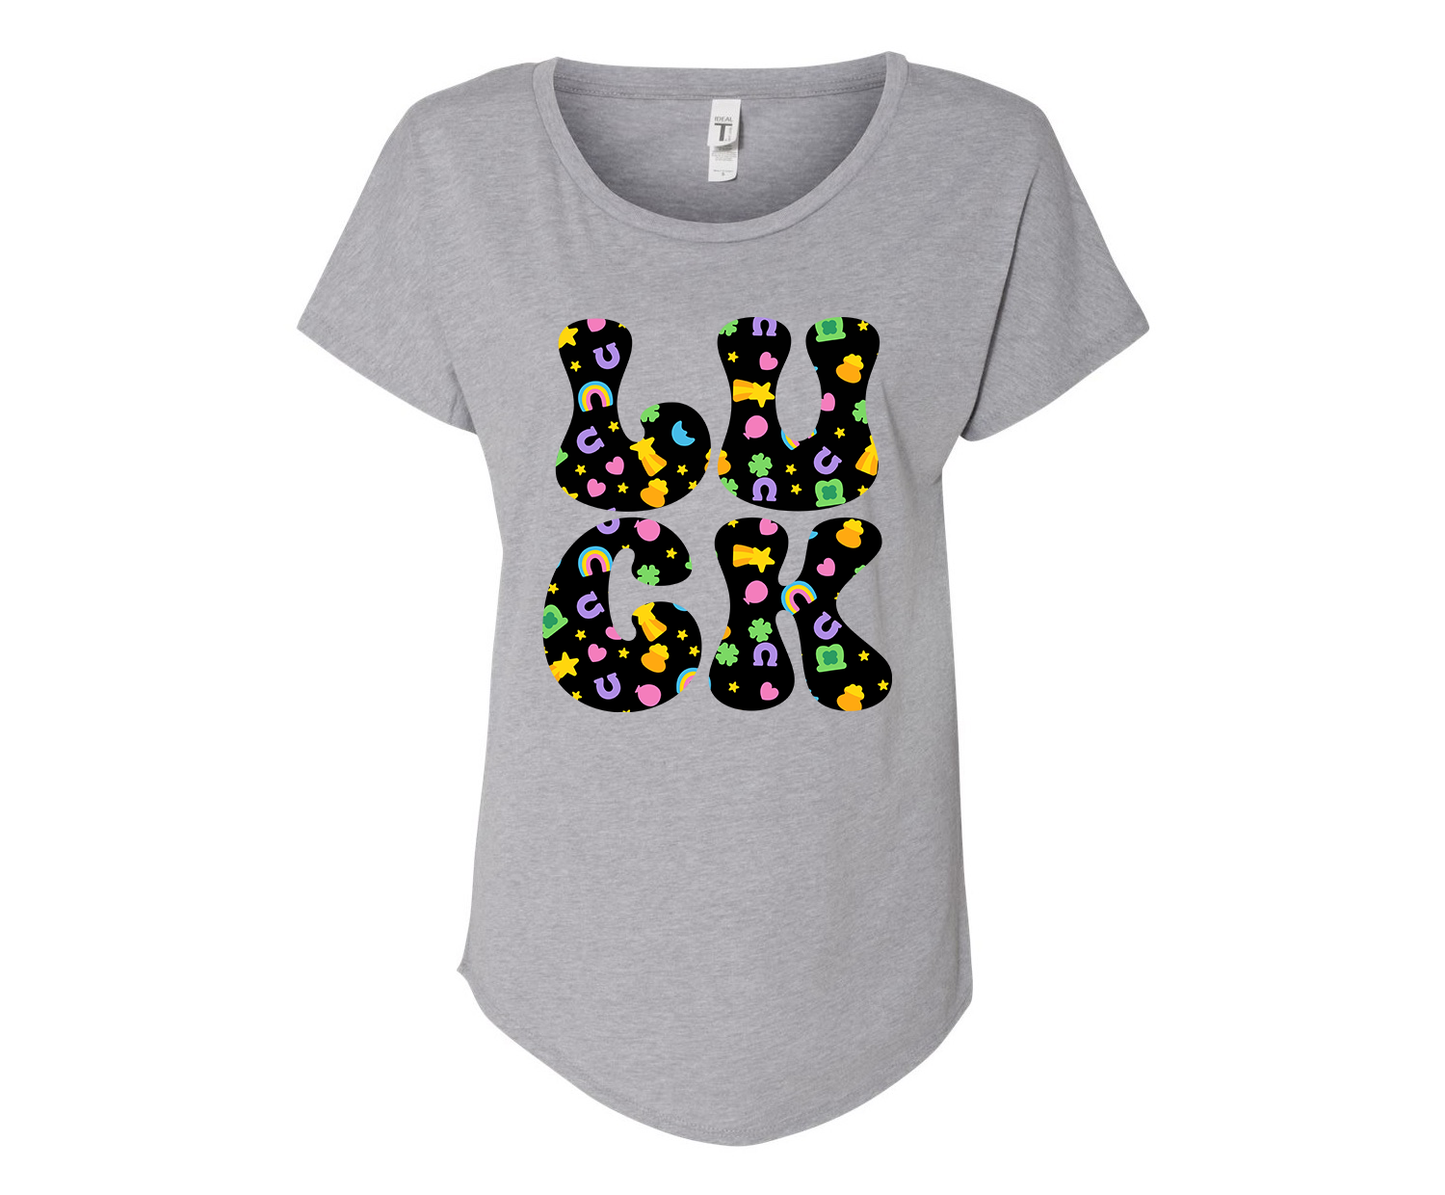 Luck & Lucky Charms Ladies Tee Shirt - In Grey & White